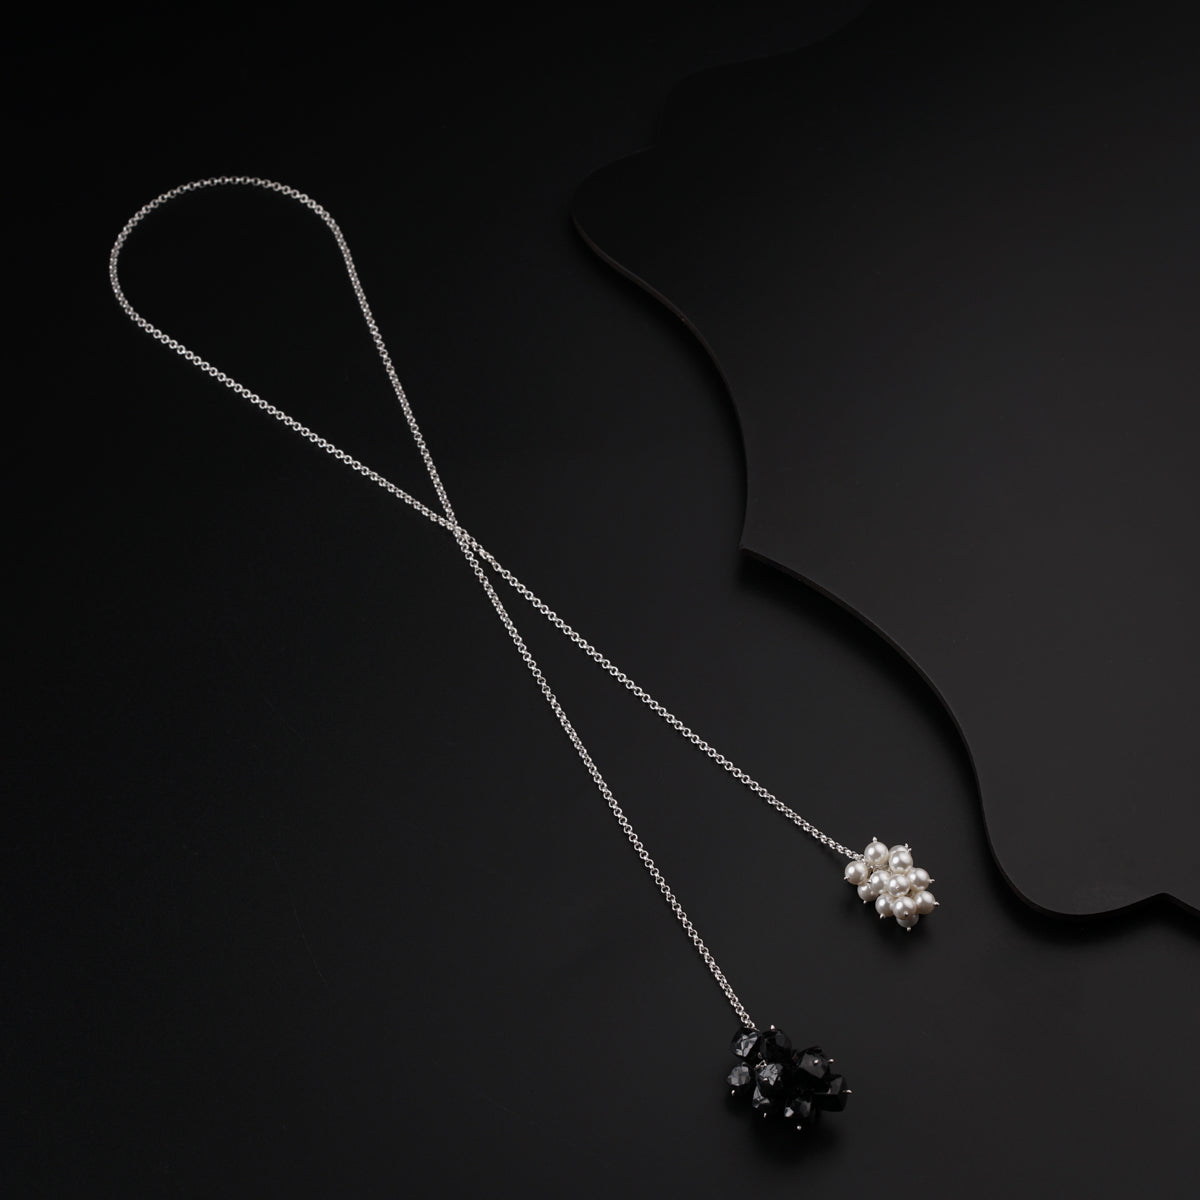 Silver Tie & Wear Necklace with Pearls & Black Onyx